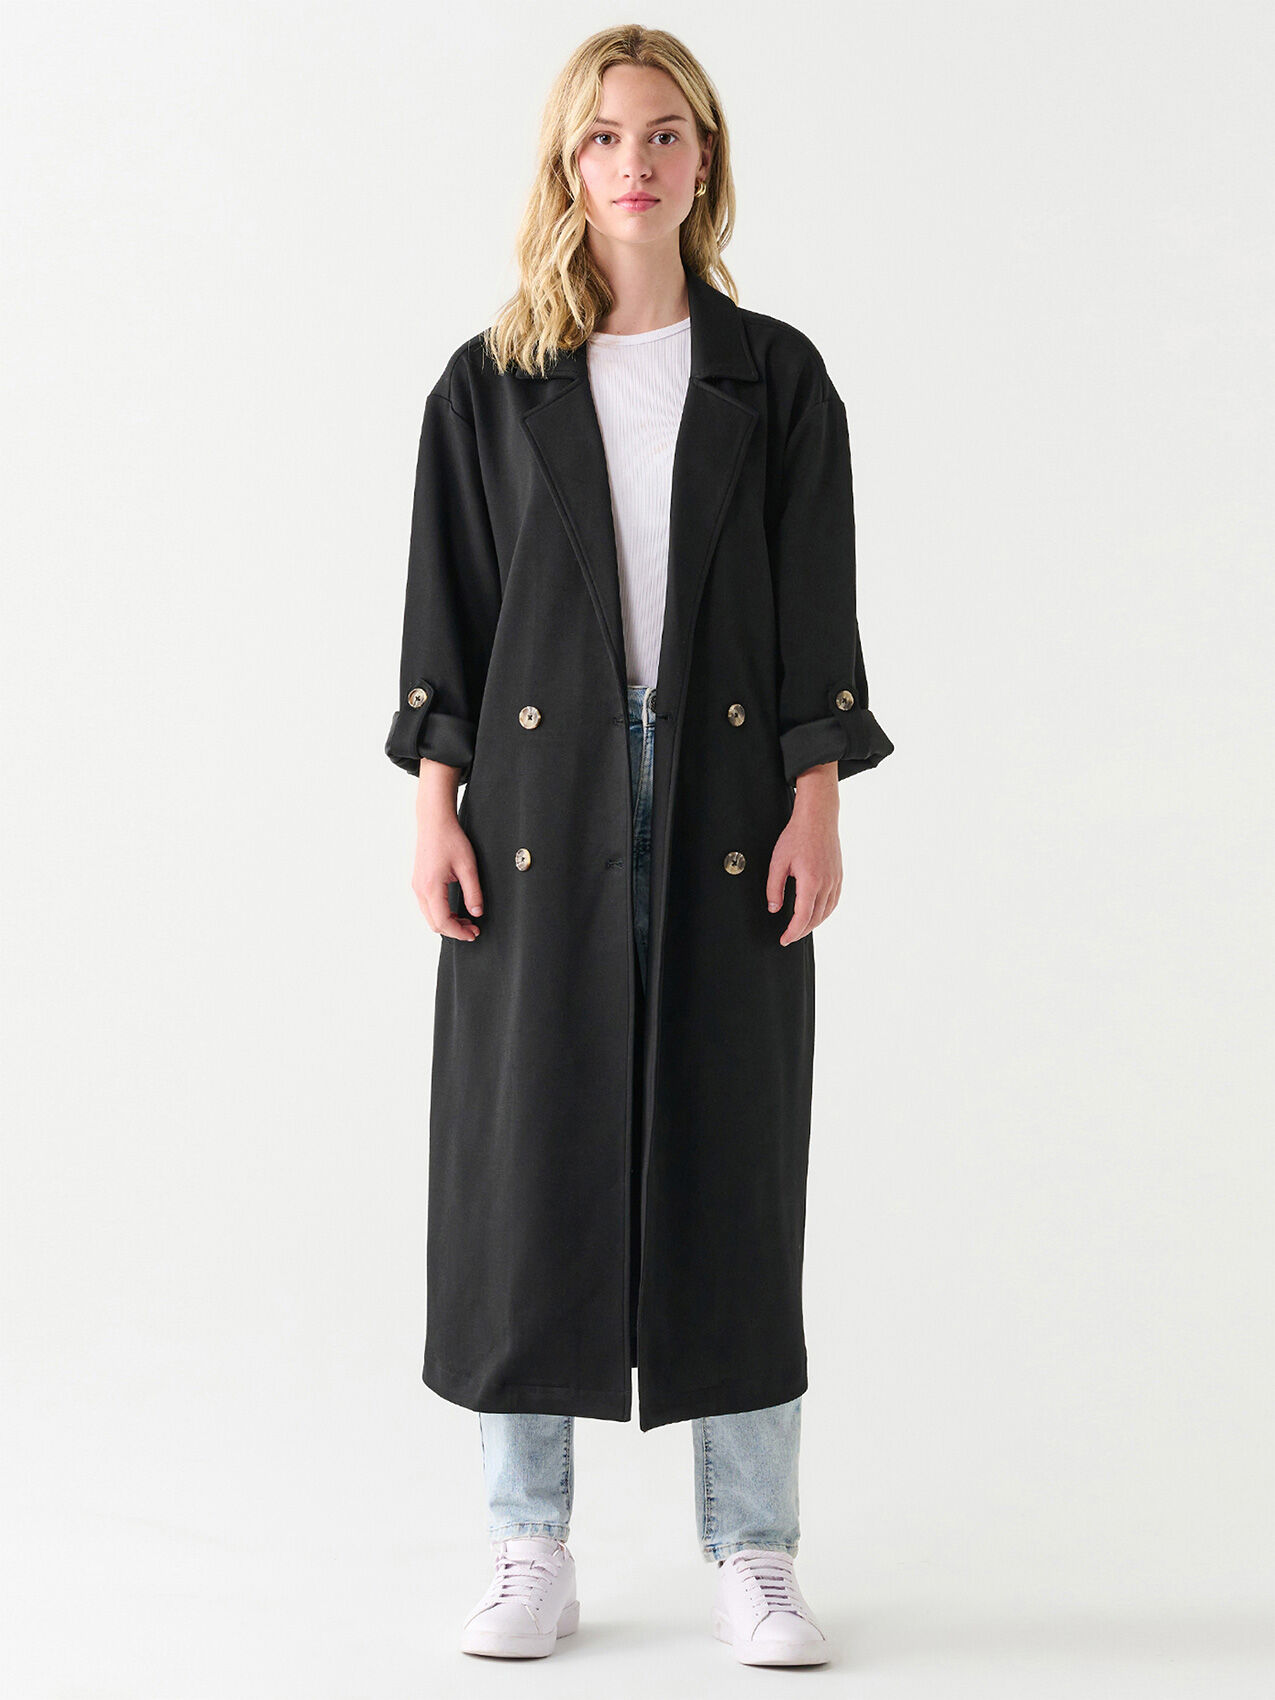 Double Breasted Knit Trench Coat by Dex